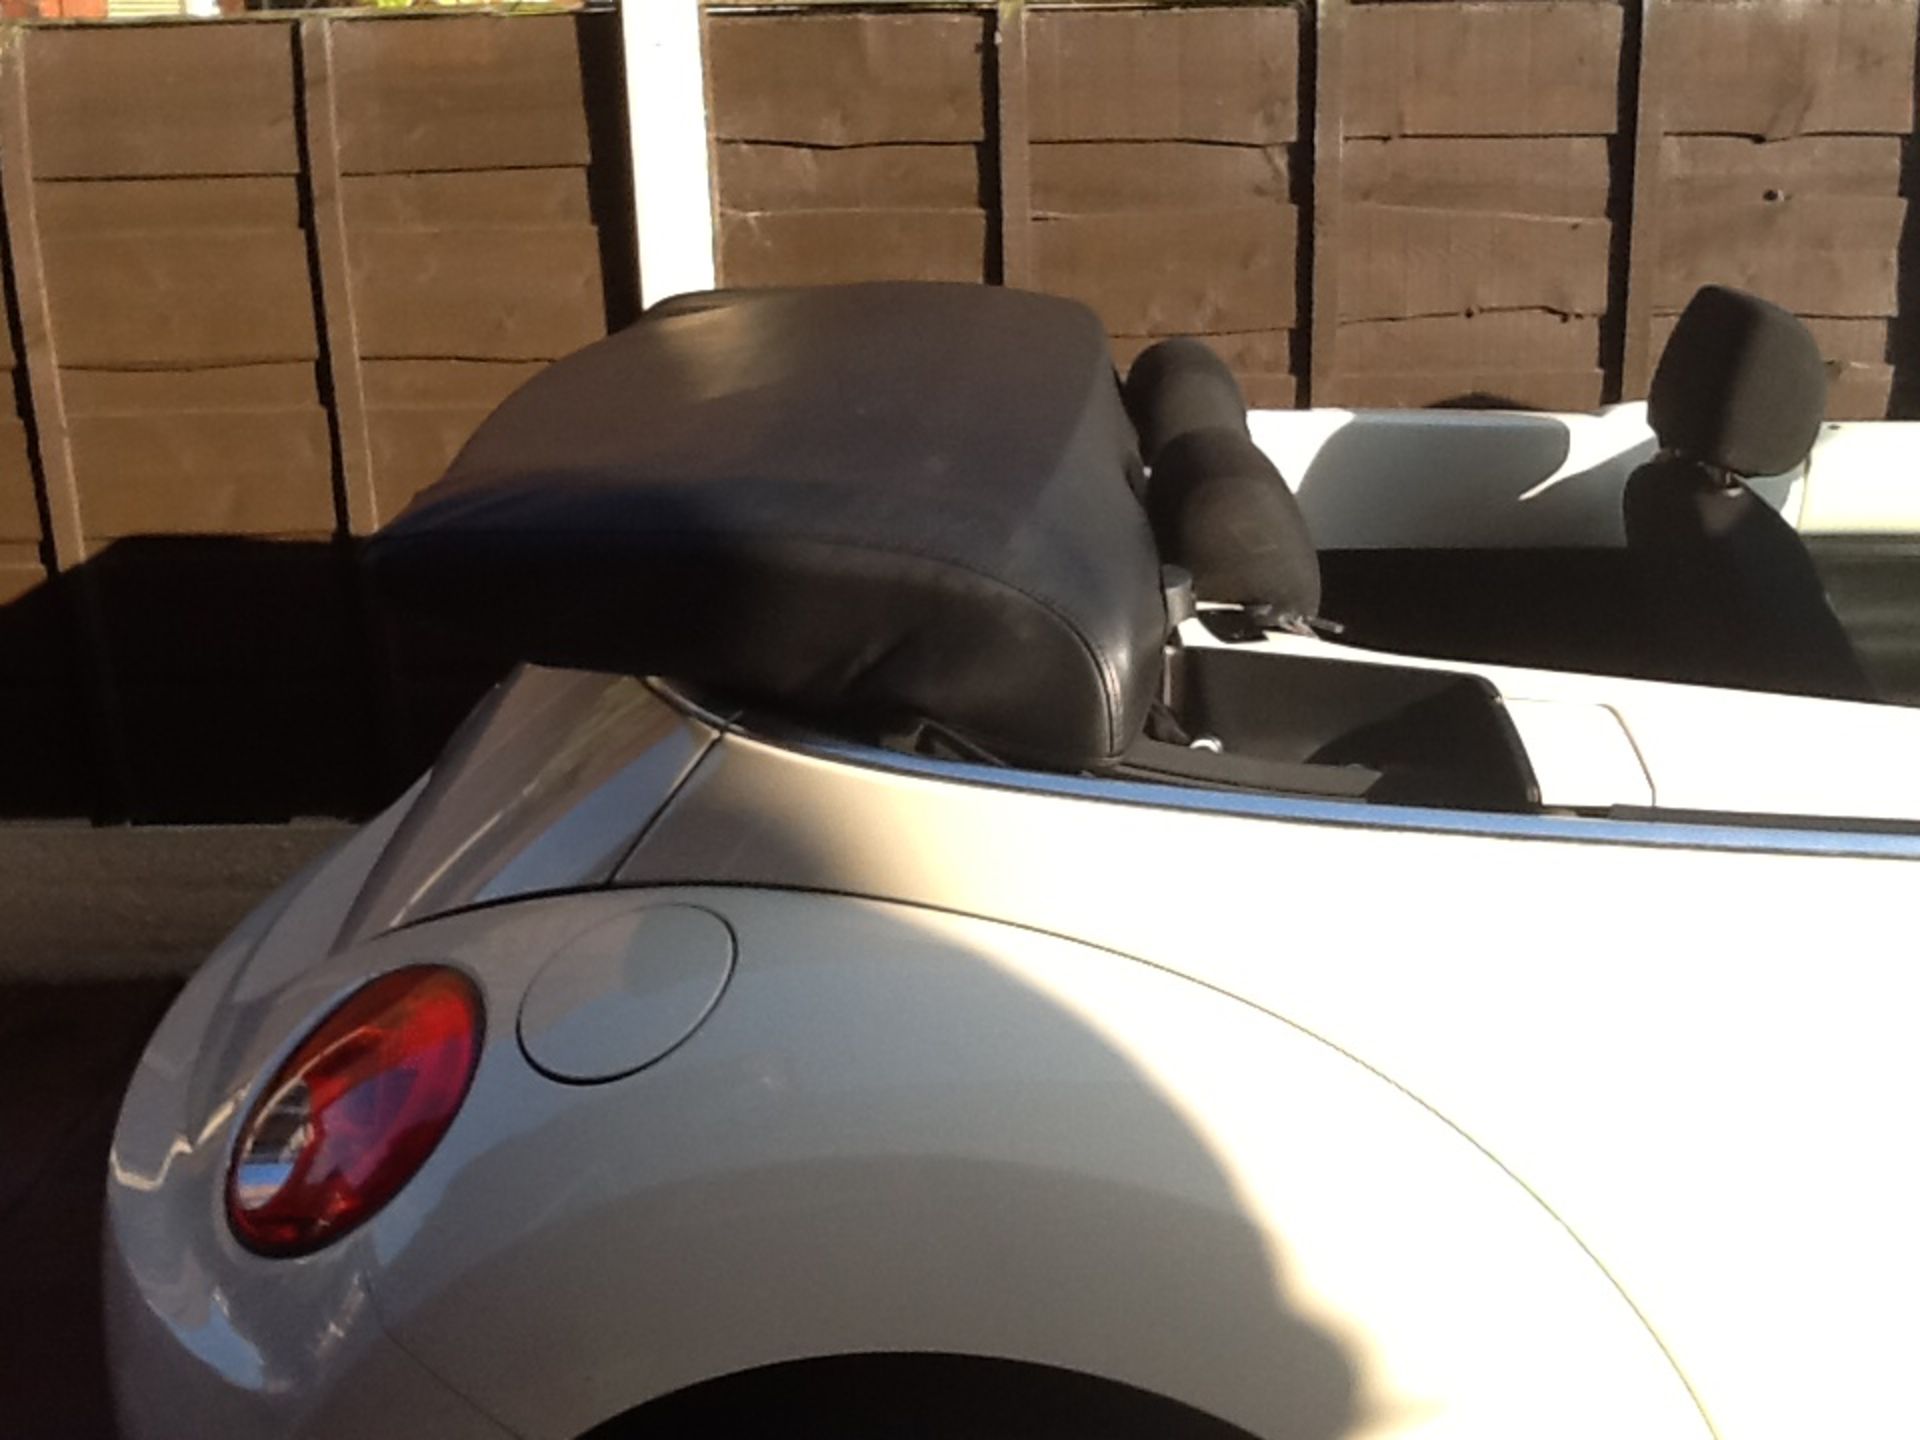 2008 on 08 plate VW Beetle luna 1.4 ltr convertible in good condition, Beige with black roof. 44k - Image 12 of 14